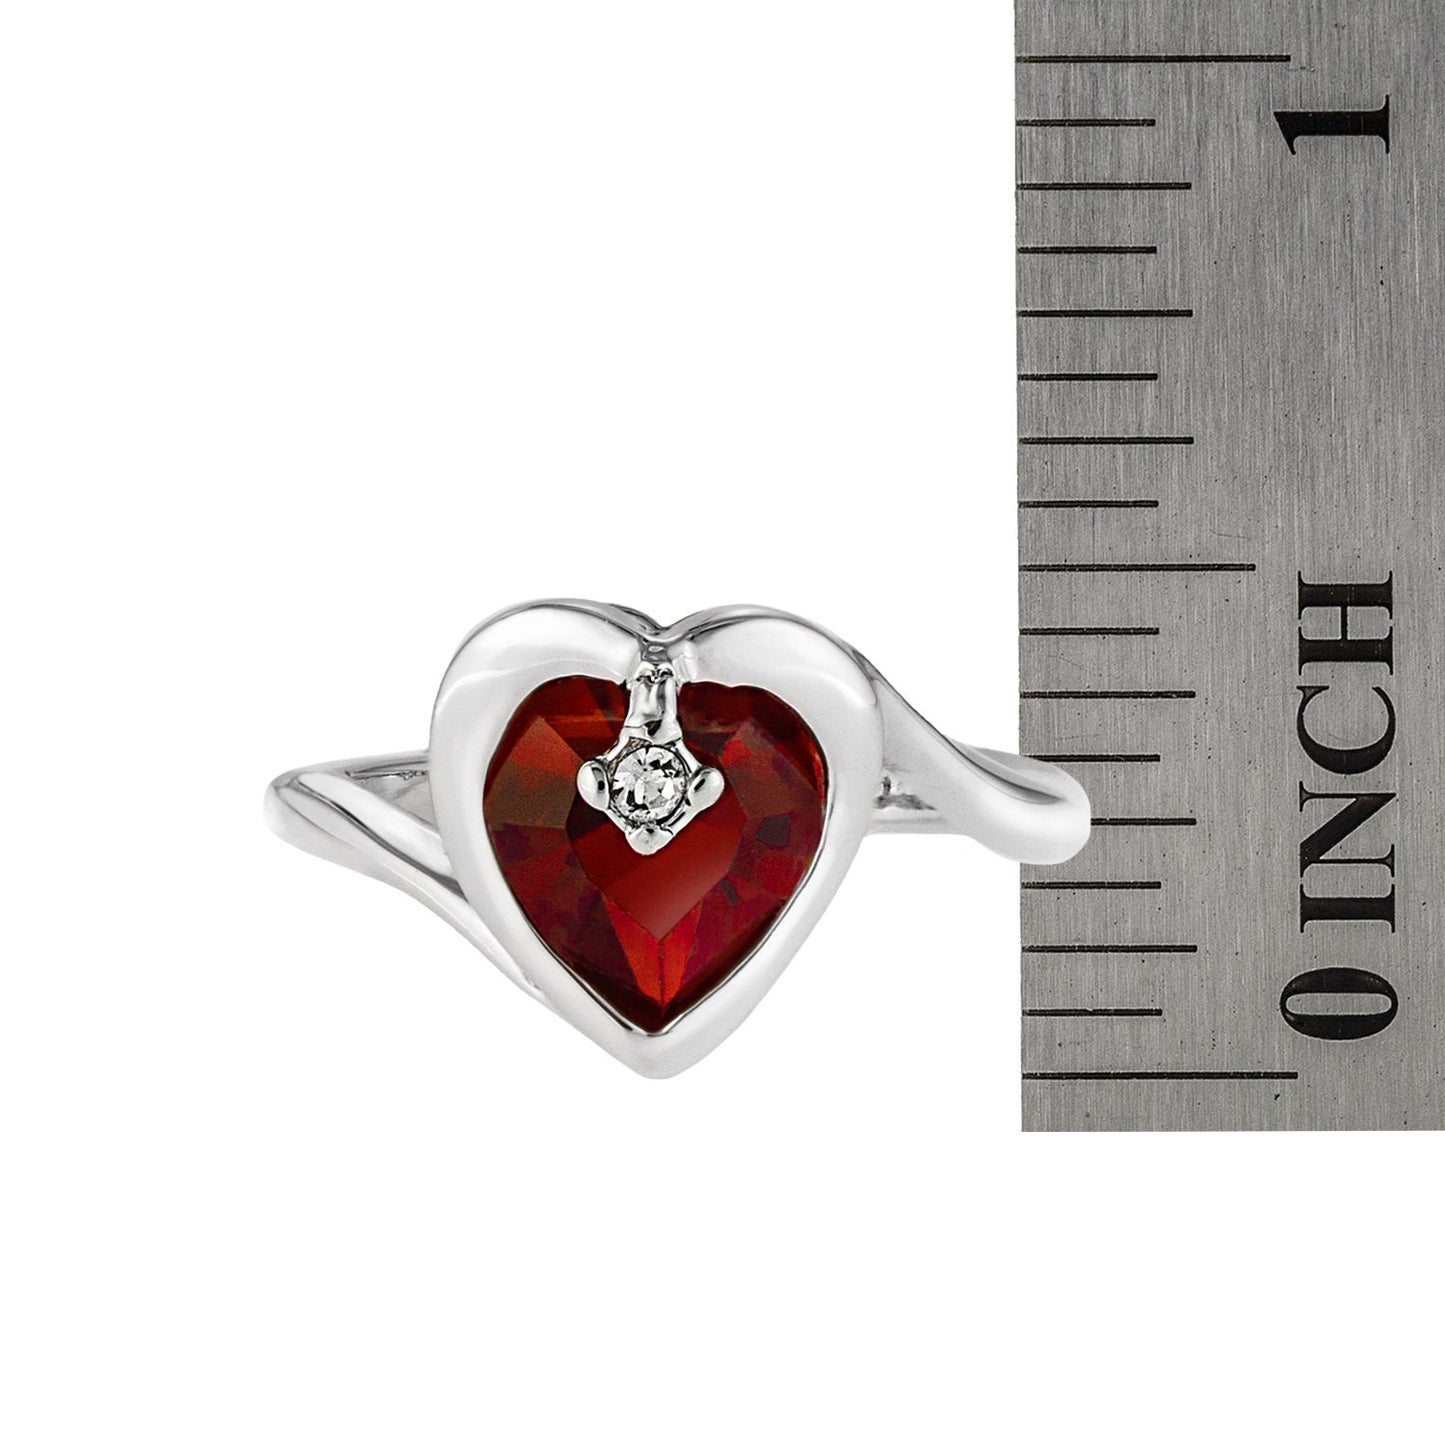 Vintage Ring 1970s Heart Shape Ring with Ruby Swarovski Crystal 18k White Gold Silver  #R1400 - Limited Stock - Never Worn